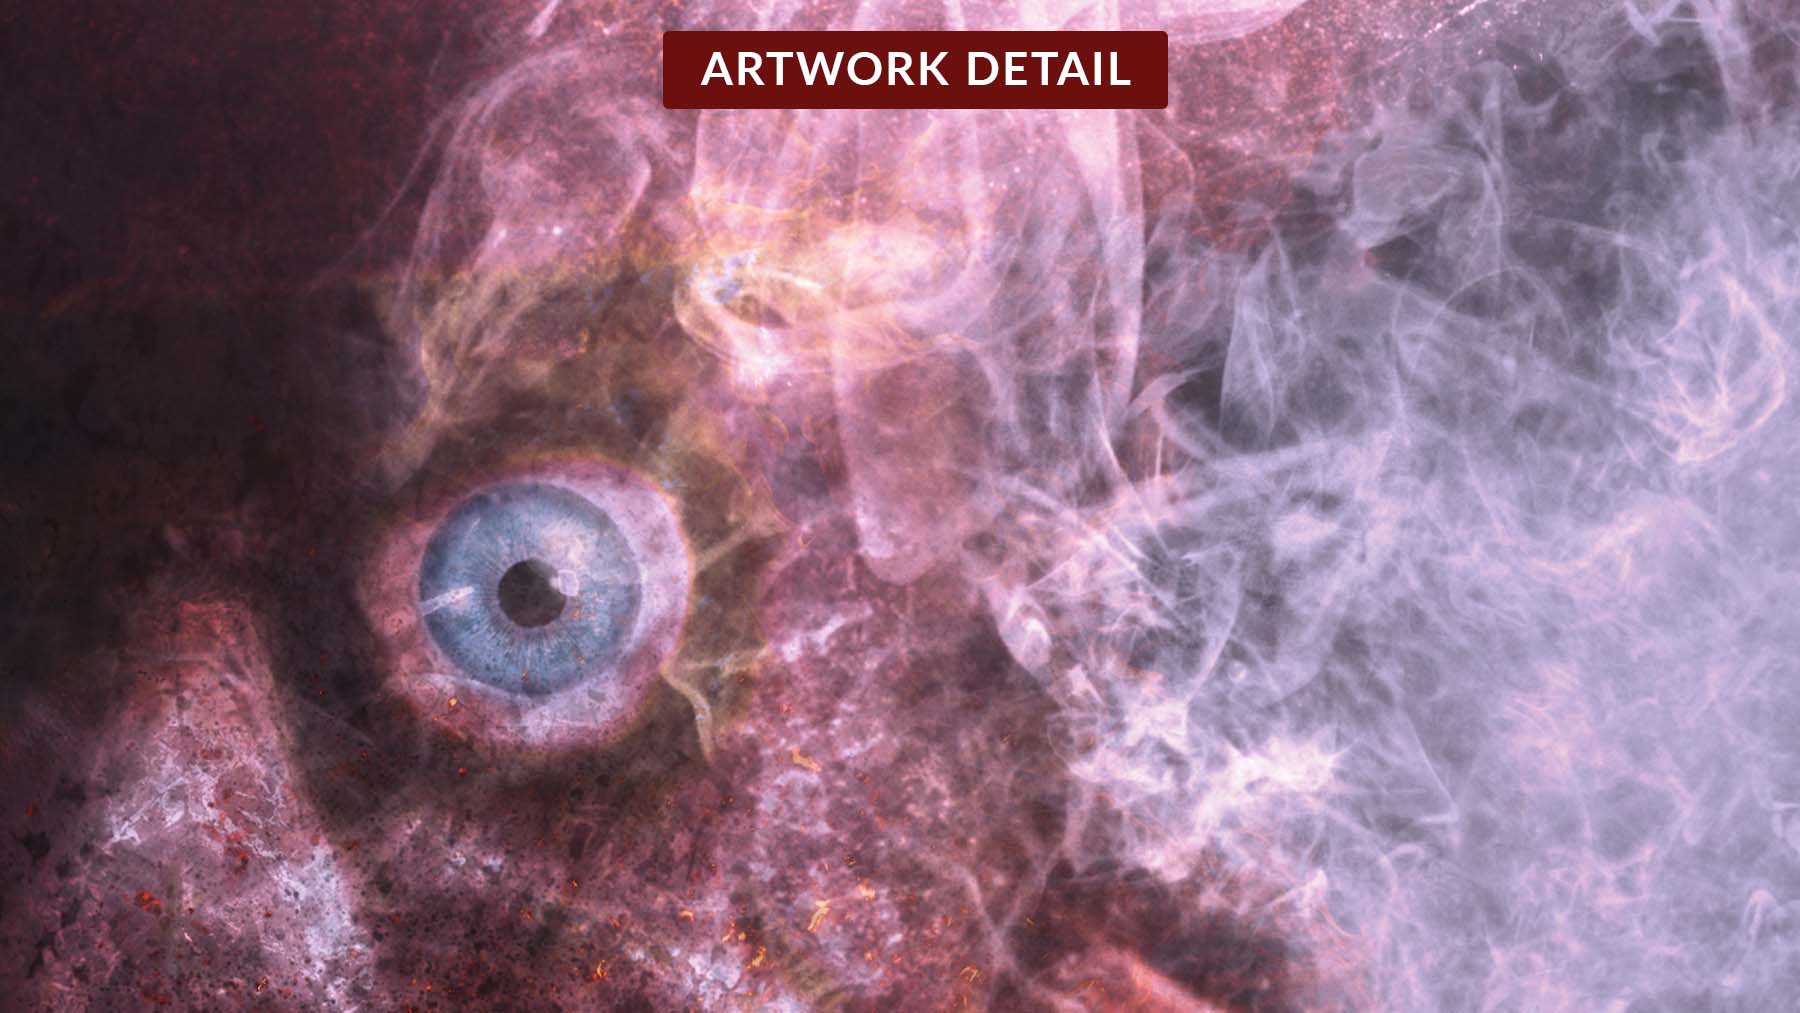 Eye detail from the You Reek of Fear NFT collectible artwork